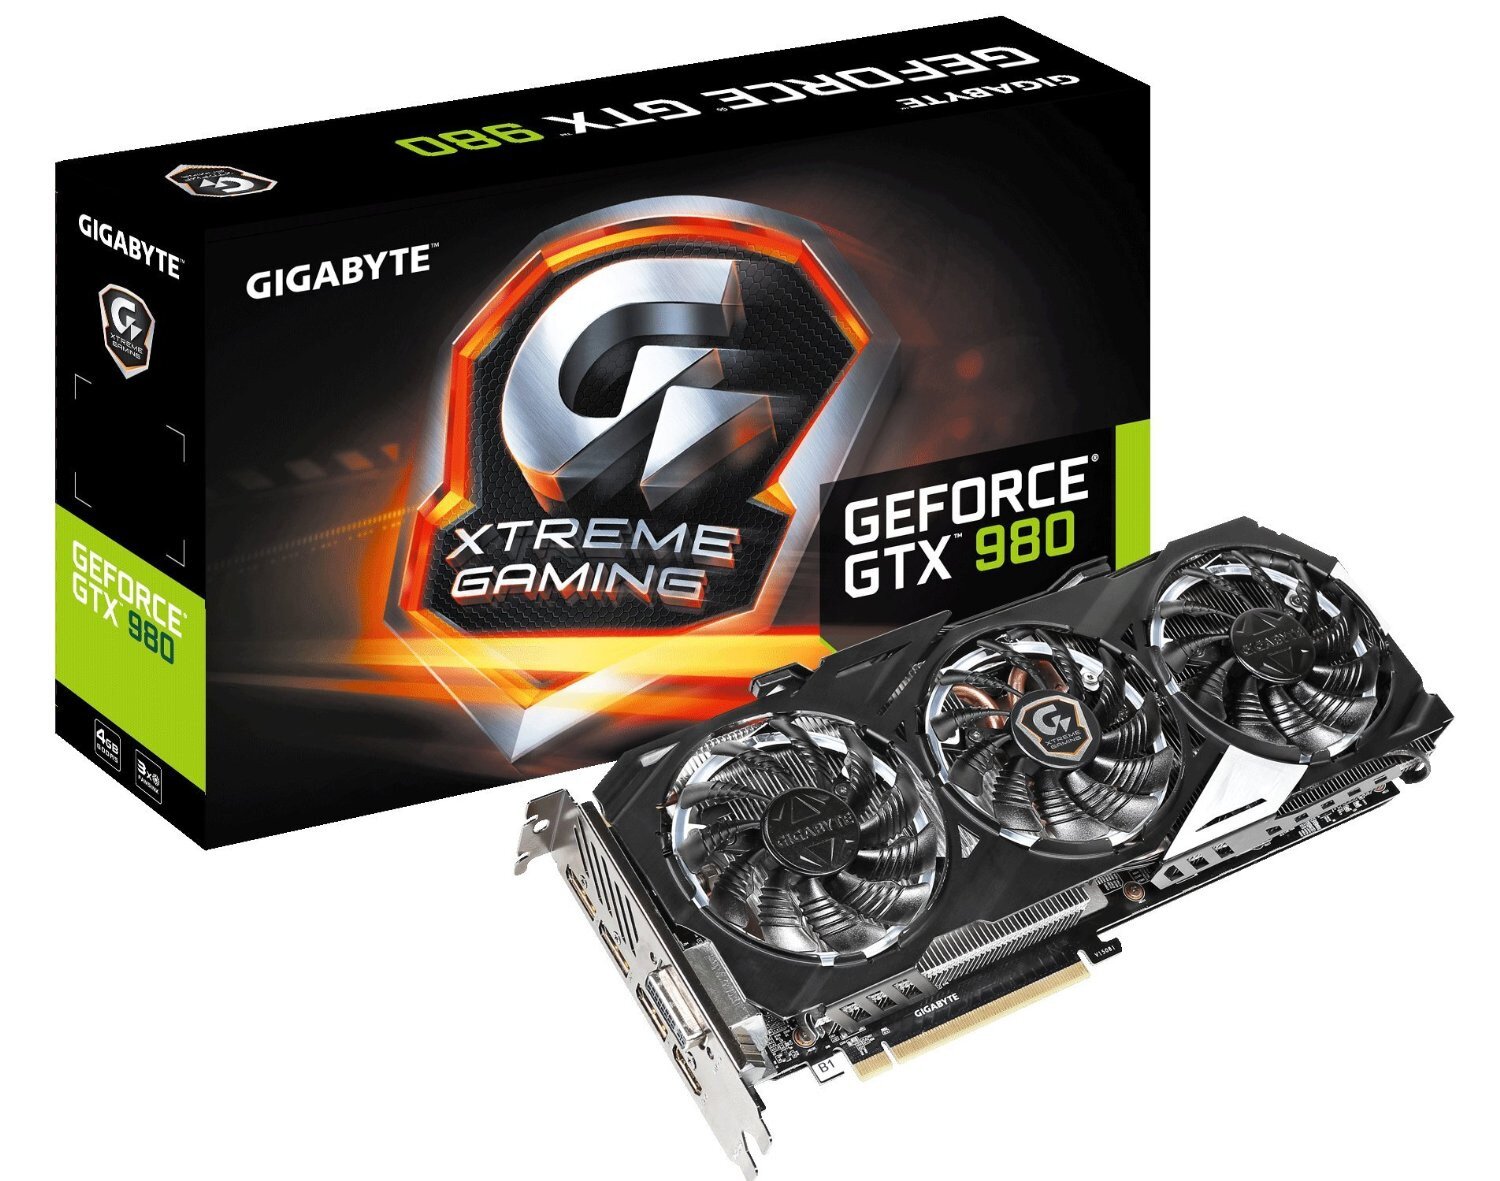 Buy Gigabyte GV-N980XTREME C-4GD Graphics Card online in Pakistan ...